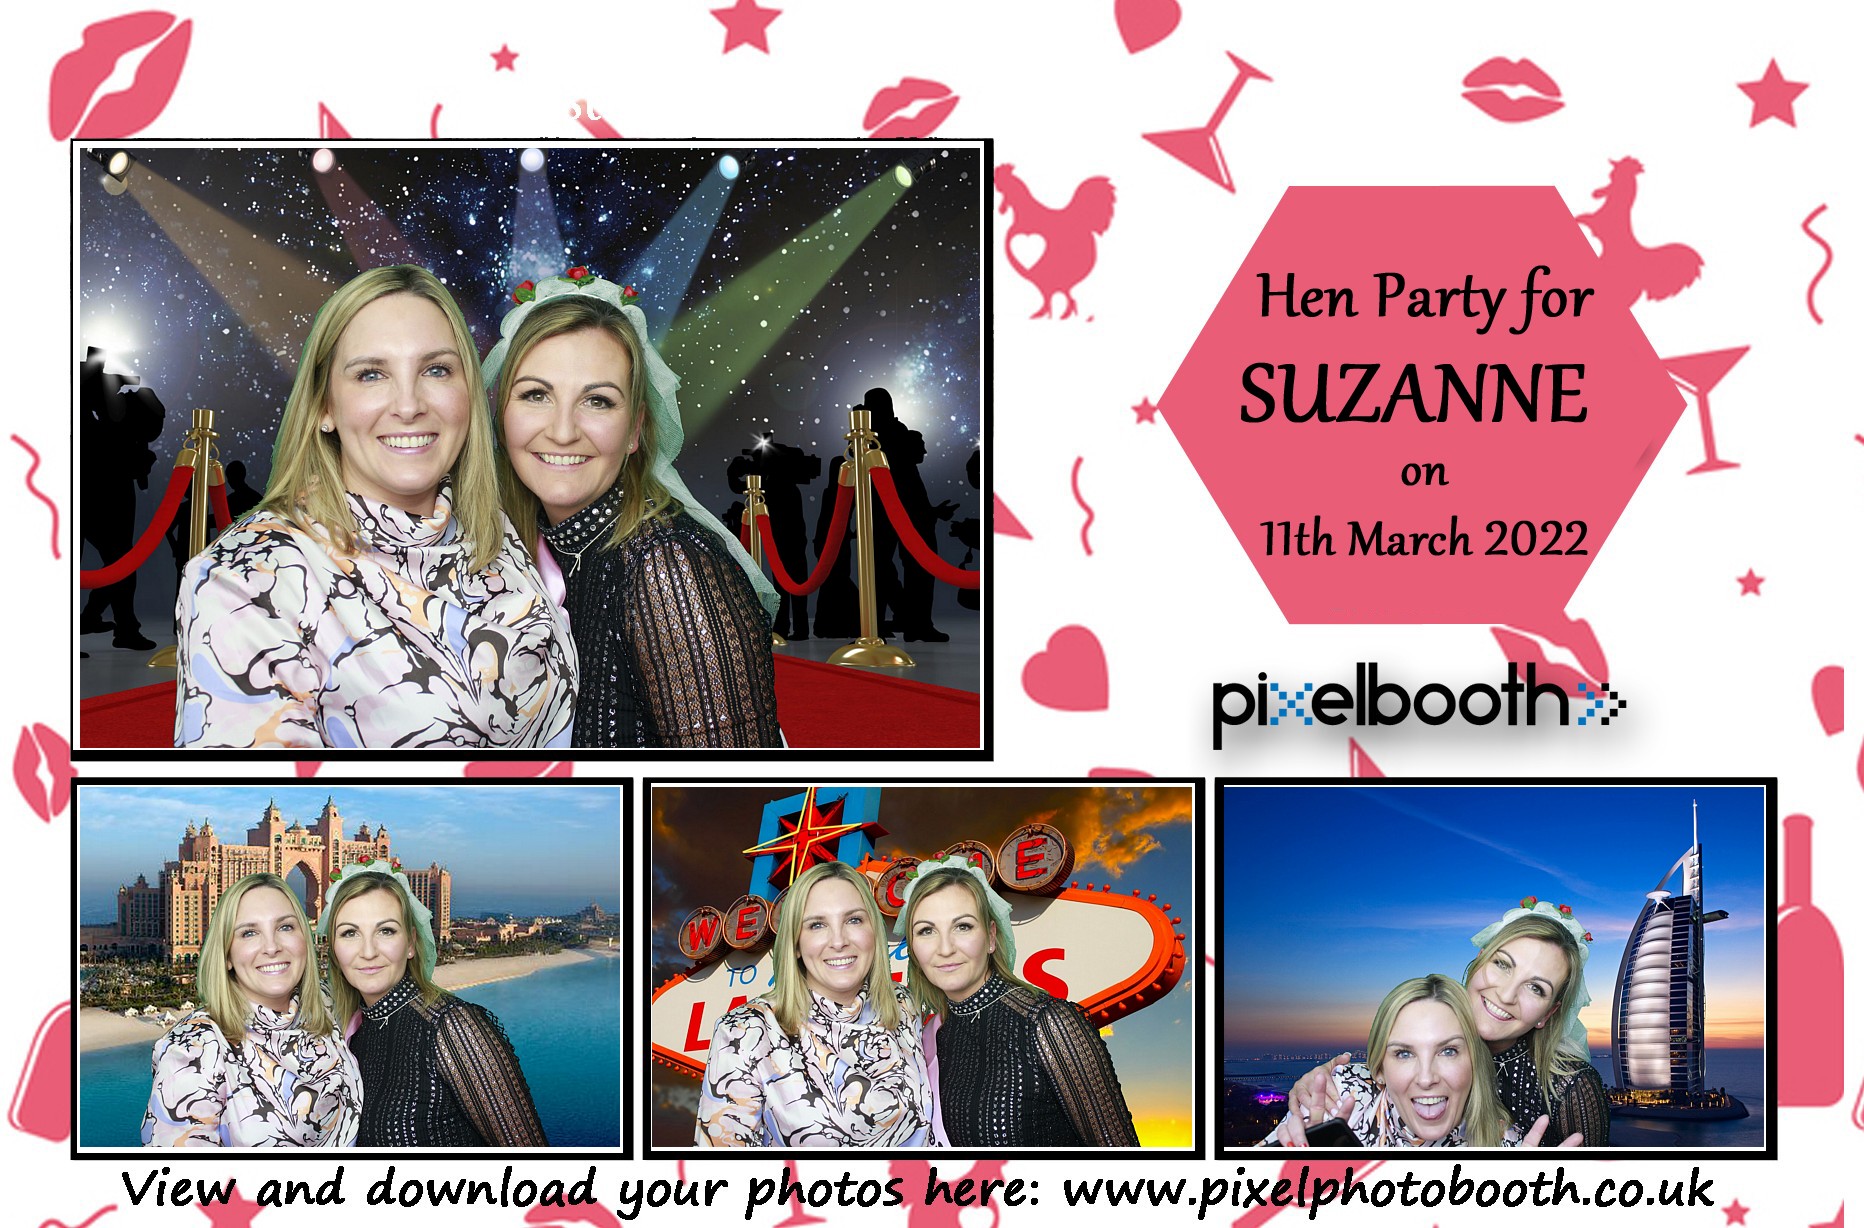 11th March 2022: Hen Party for Suzanne